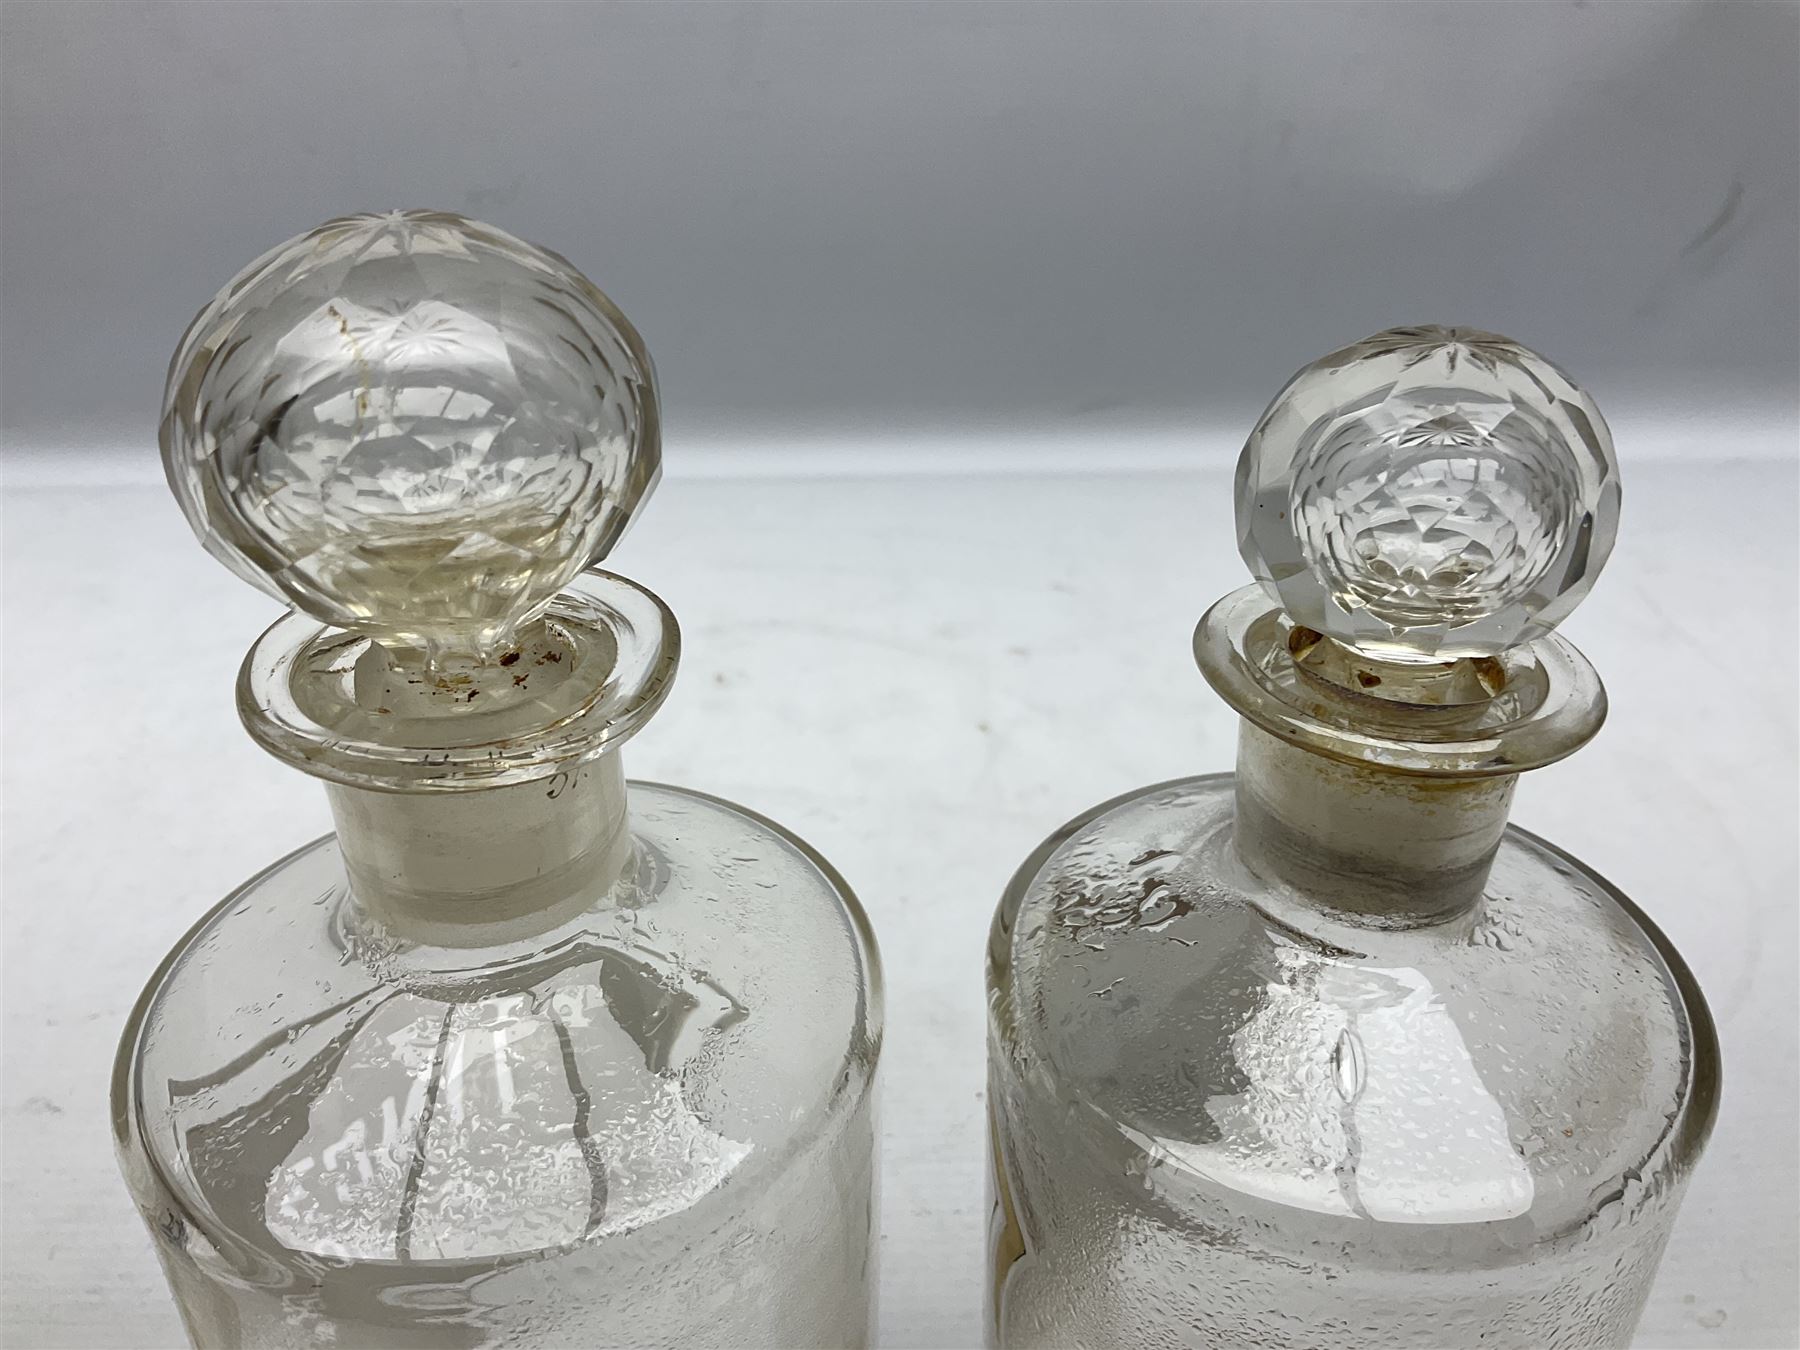 Three Victorian apothecary chemist bottles complete with labels and glass stoppers - Image 4 of 10